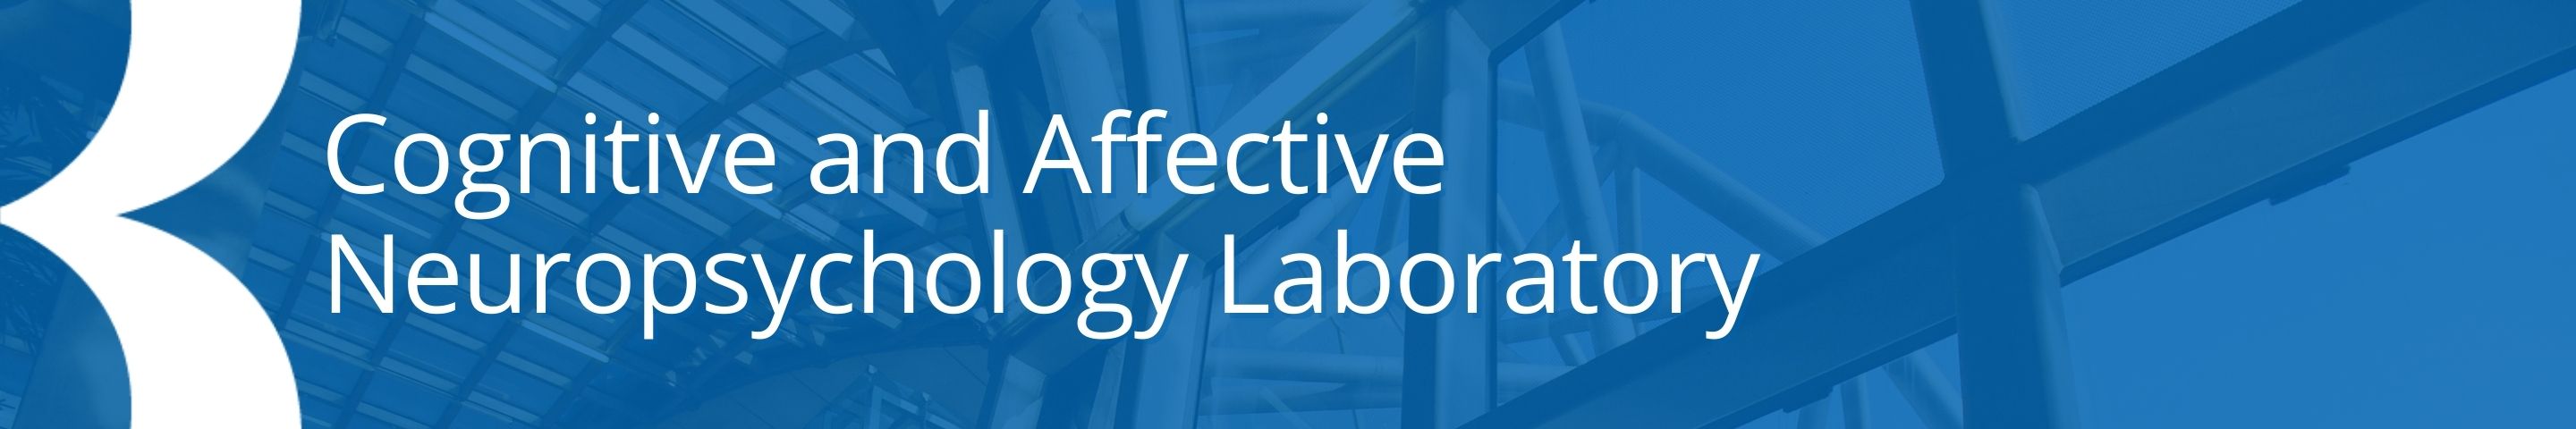 blue banner cognitive and affective neuropsychology laboratory